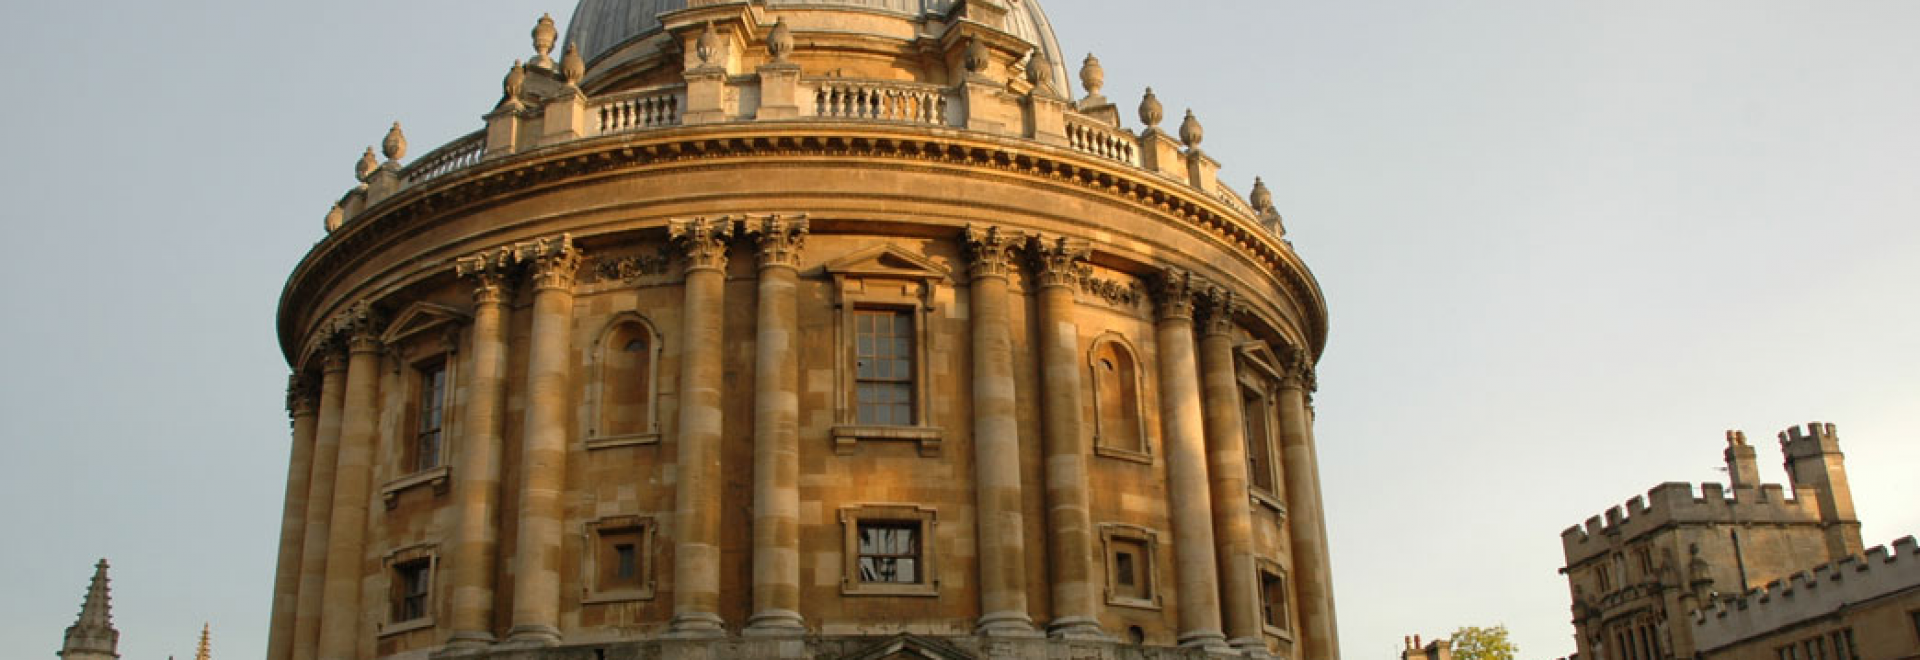 University of Oxford, Oxford - Book. Travel. Play.